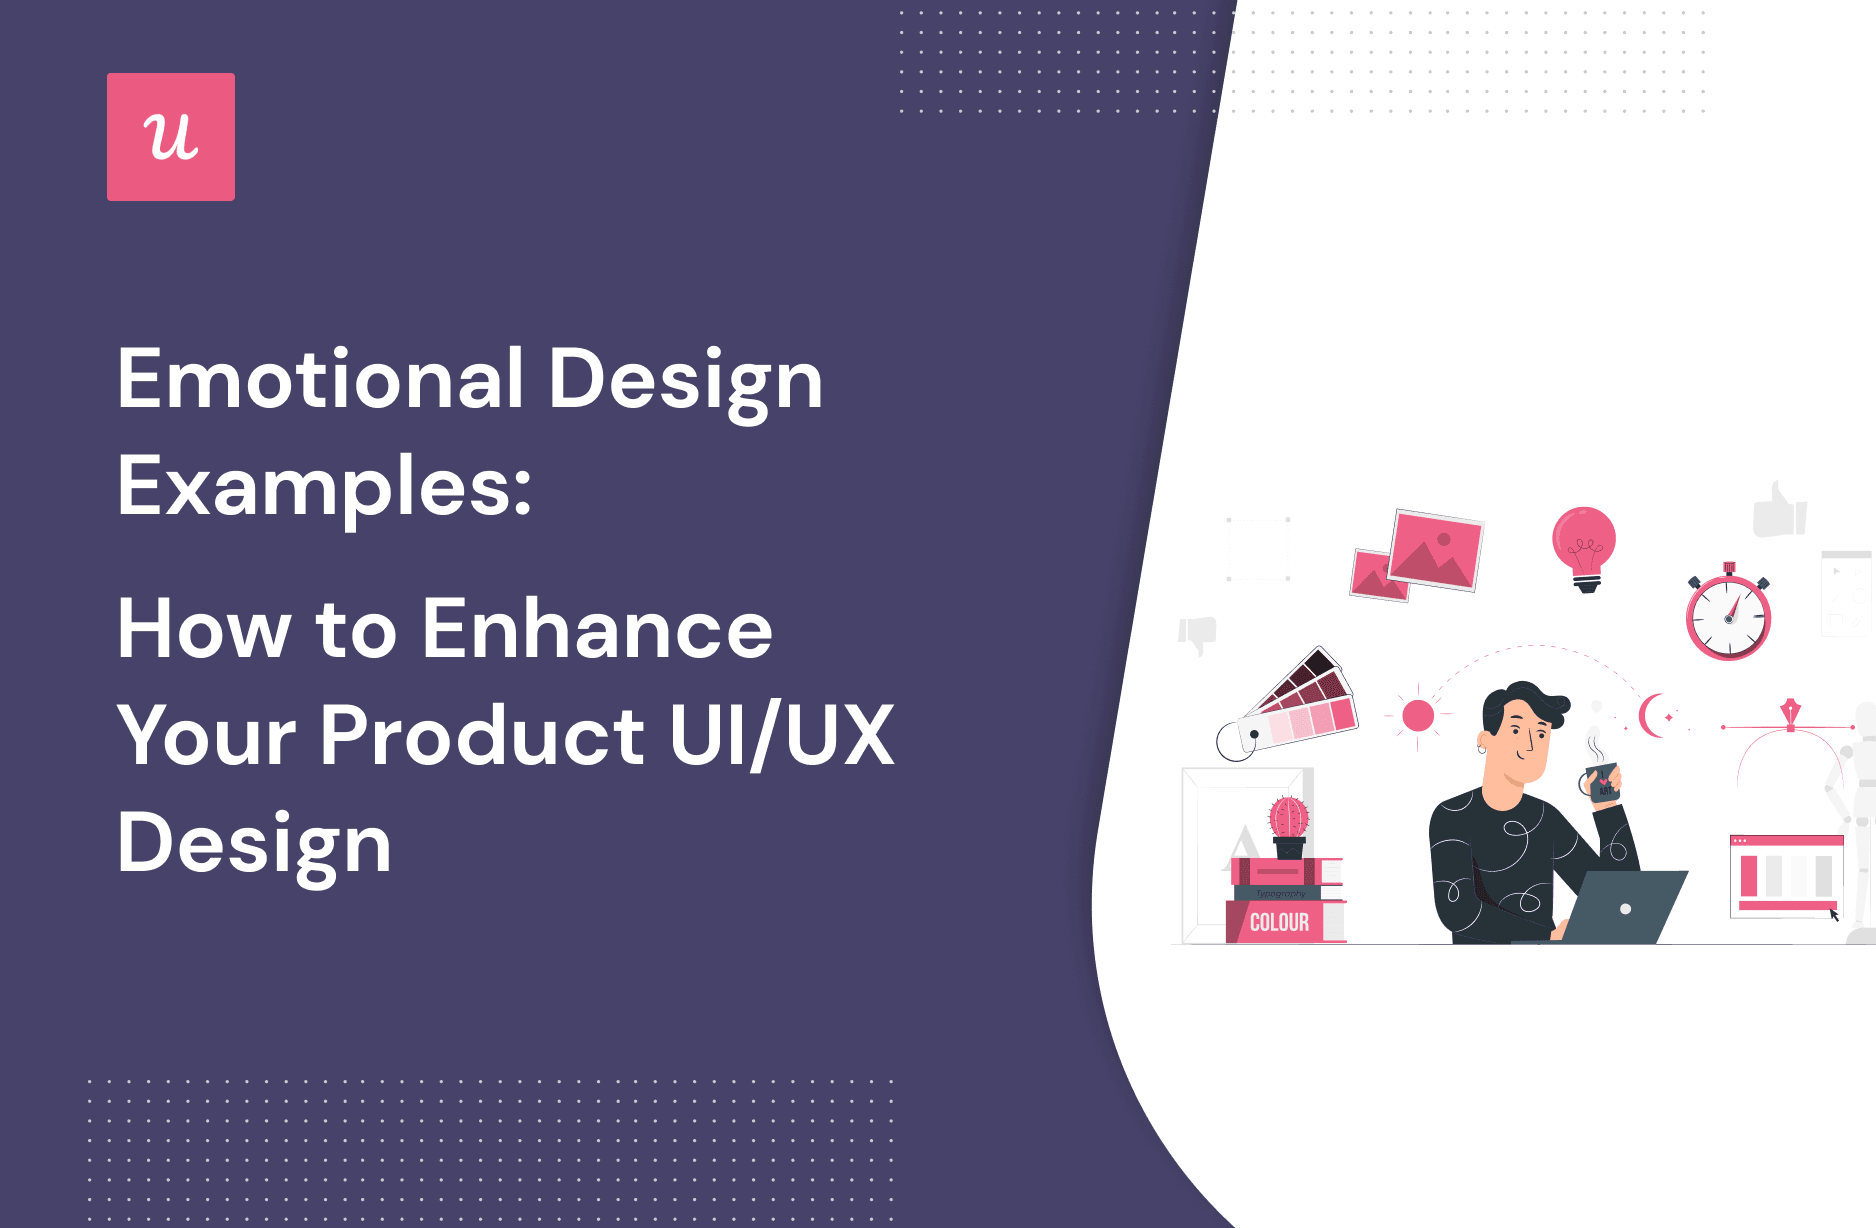 Emotional Design Examples: How to Enhance Your Product UI/UX Design